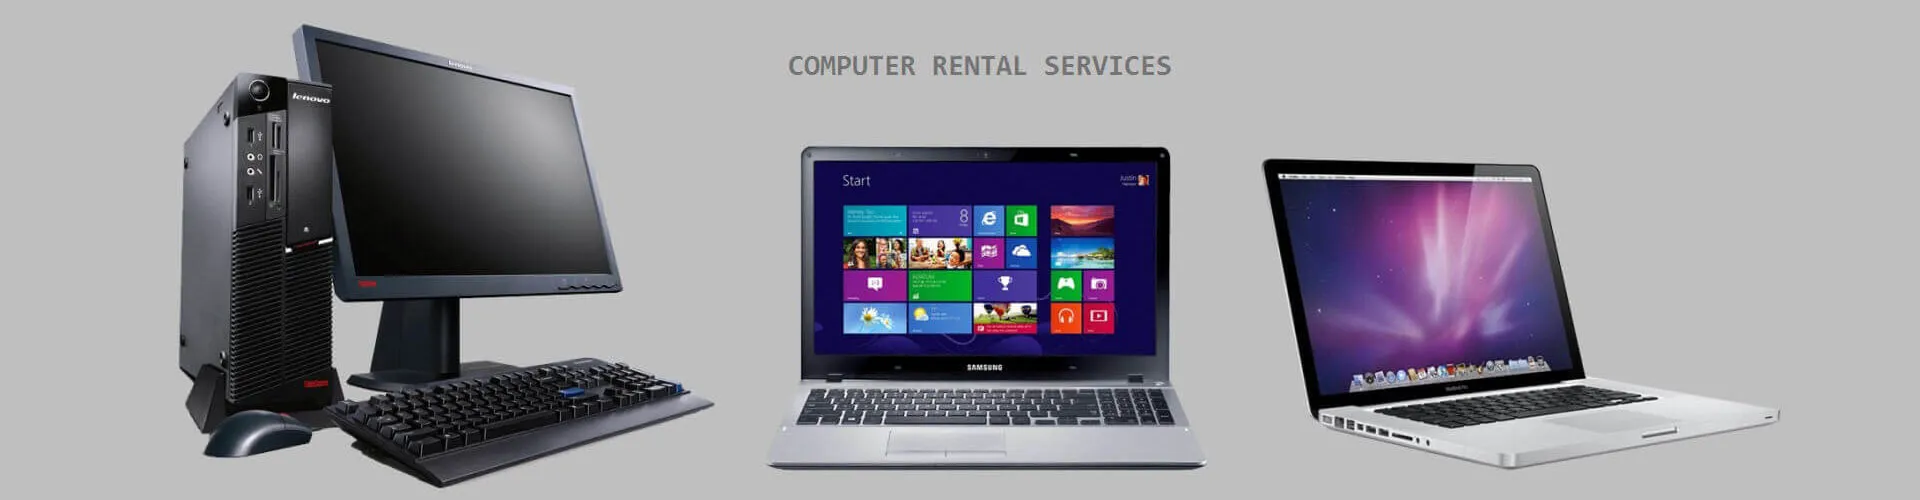 Computer rental services in Bangalore